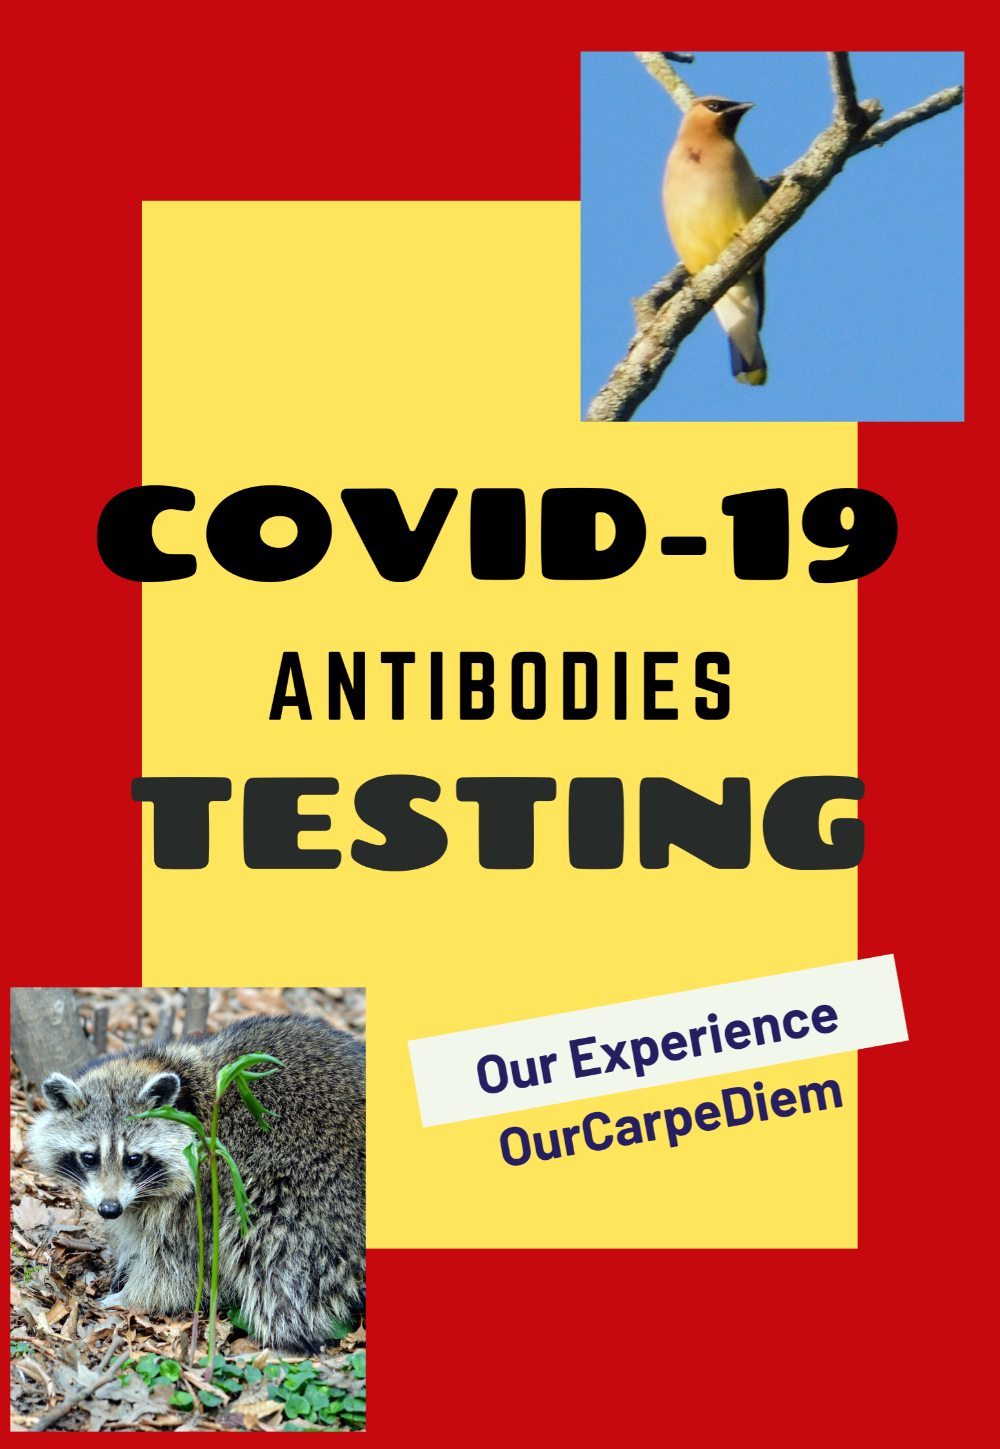 Covid-19 Antibodies Testing: Our Experience